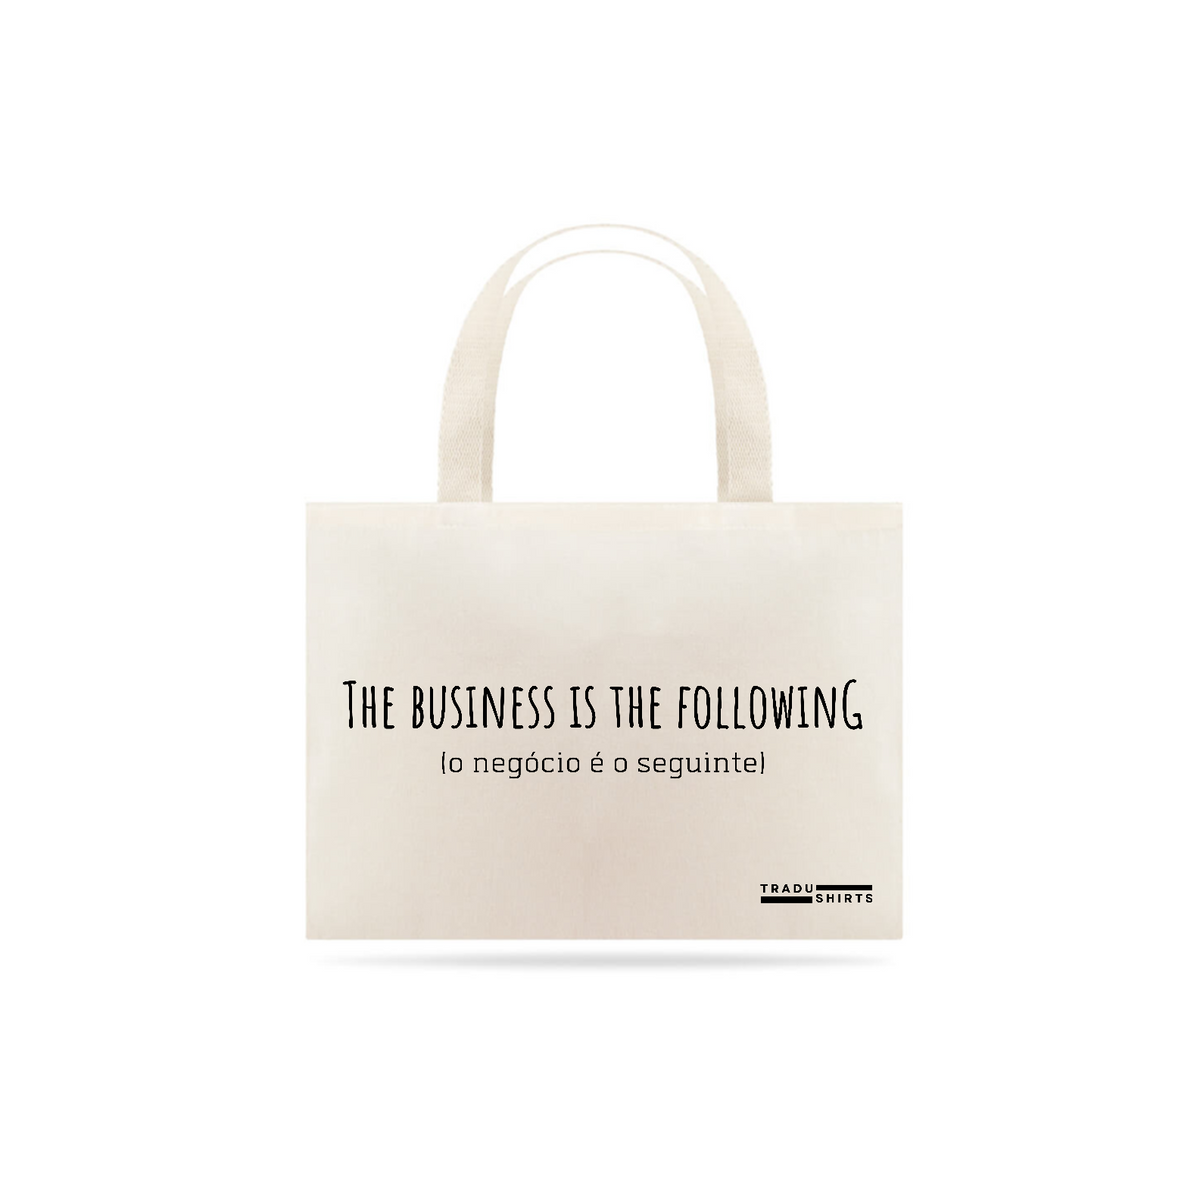 Nome do produto: The business is the following - ecobag